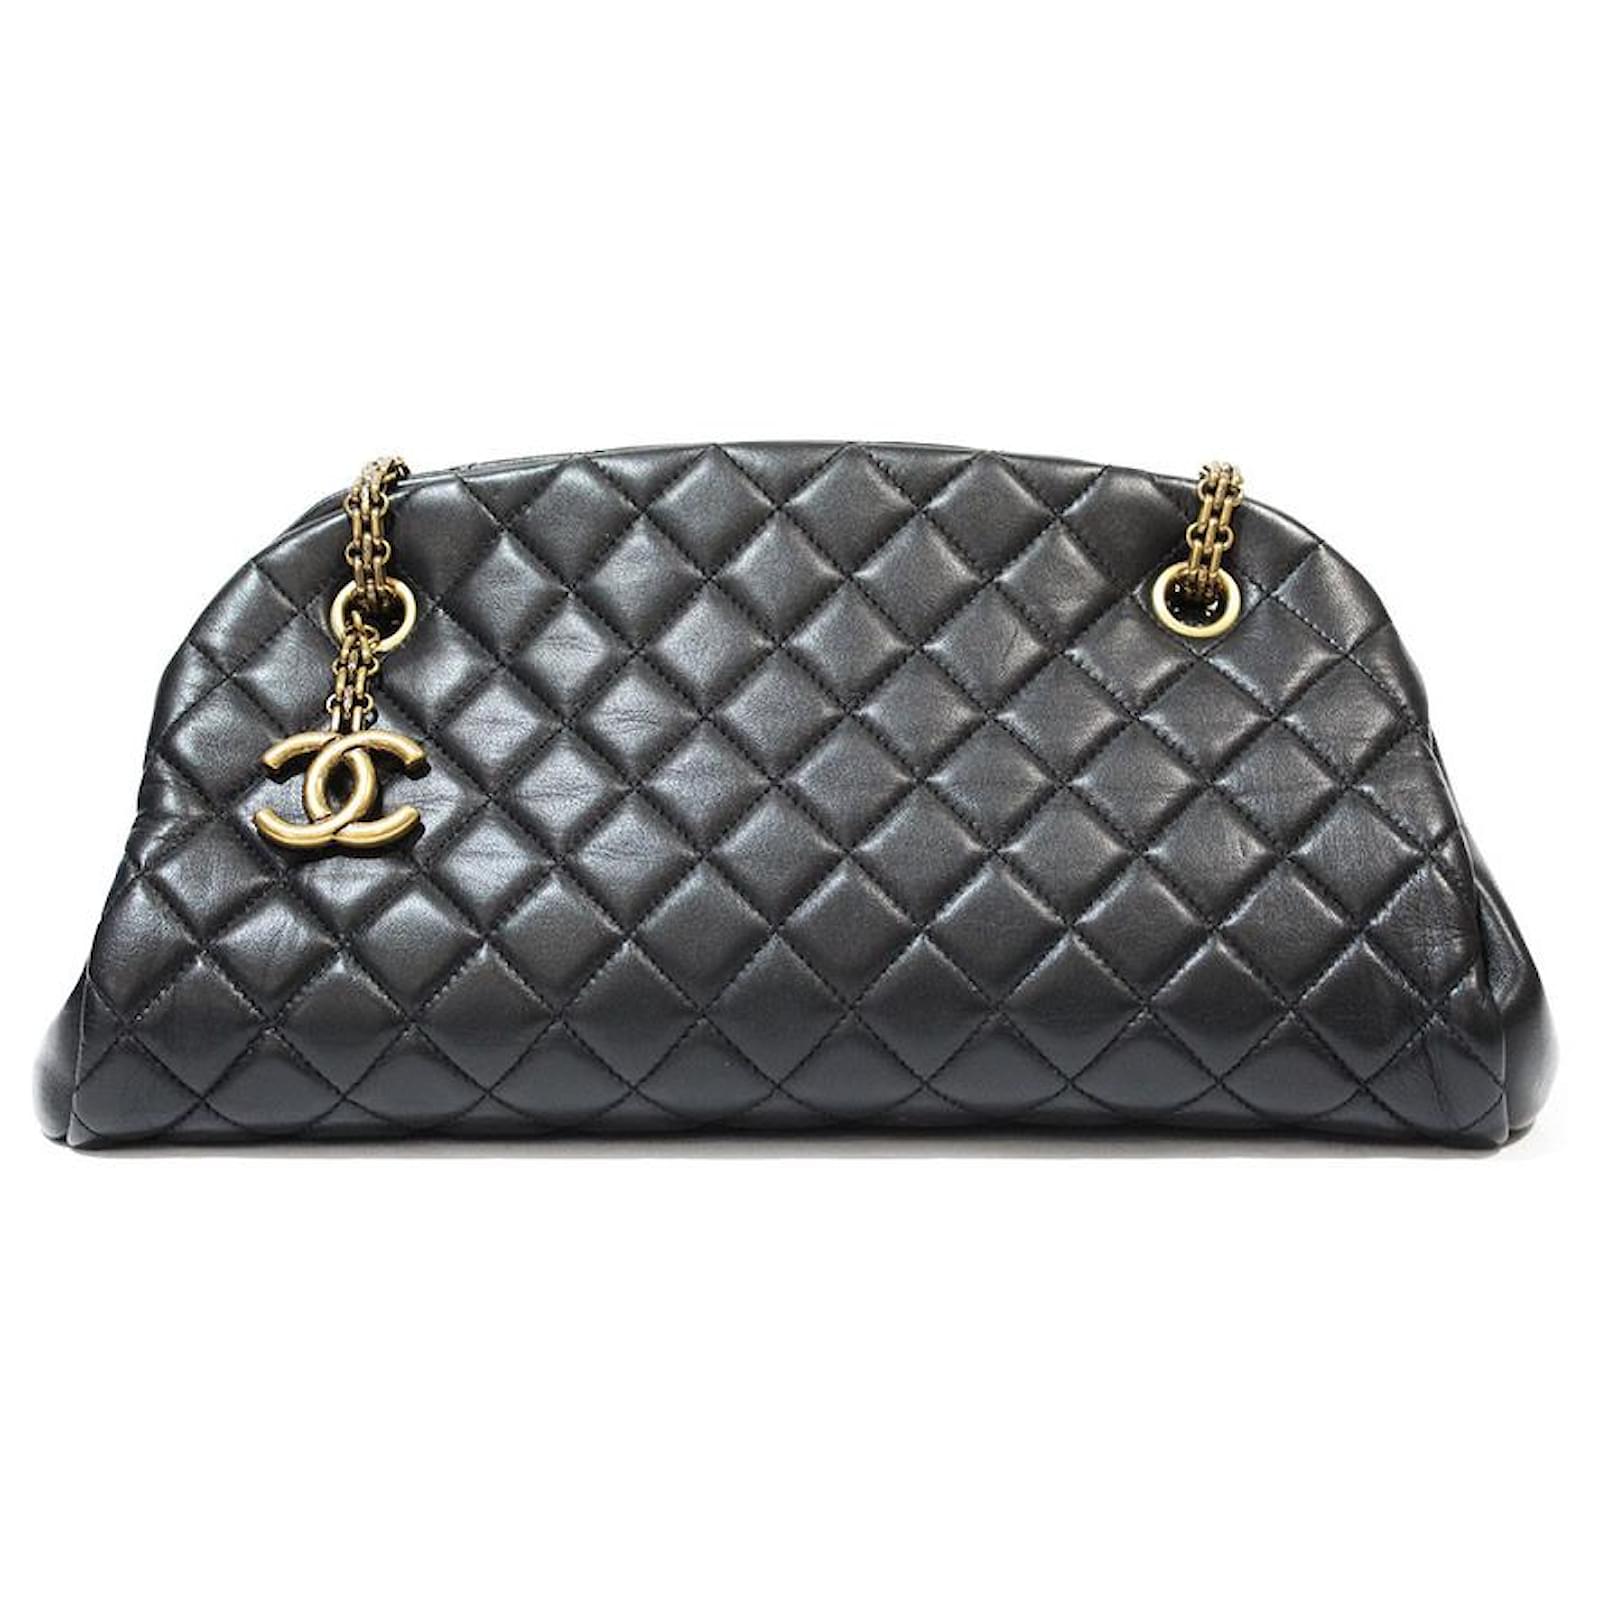 Chanel Lambskin Quilted Bowling Bag